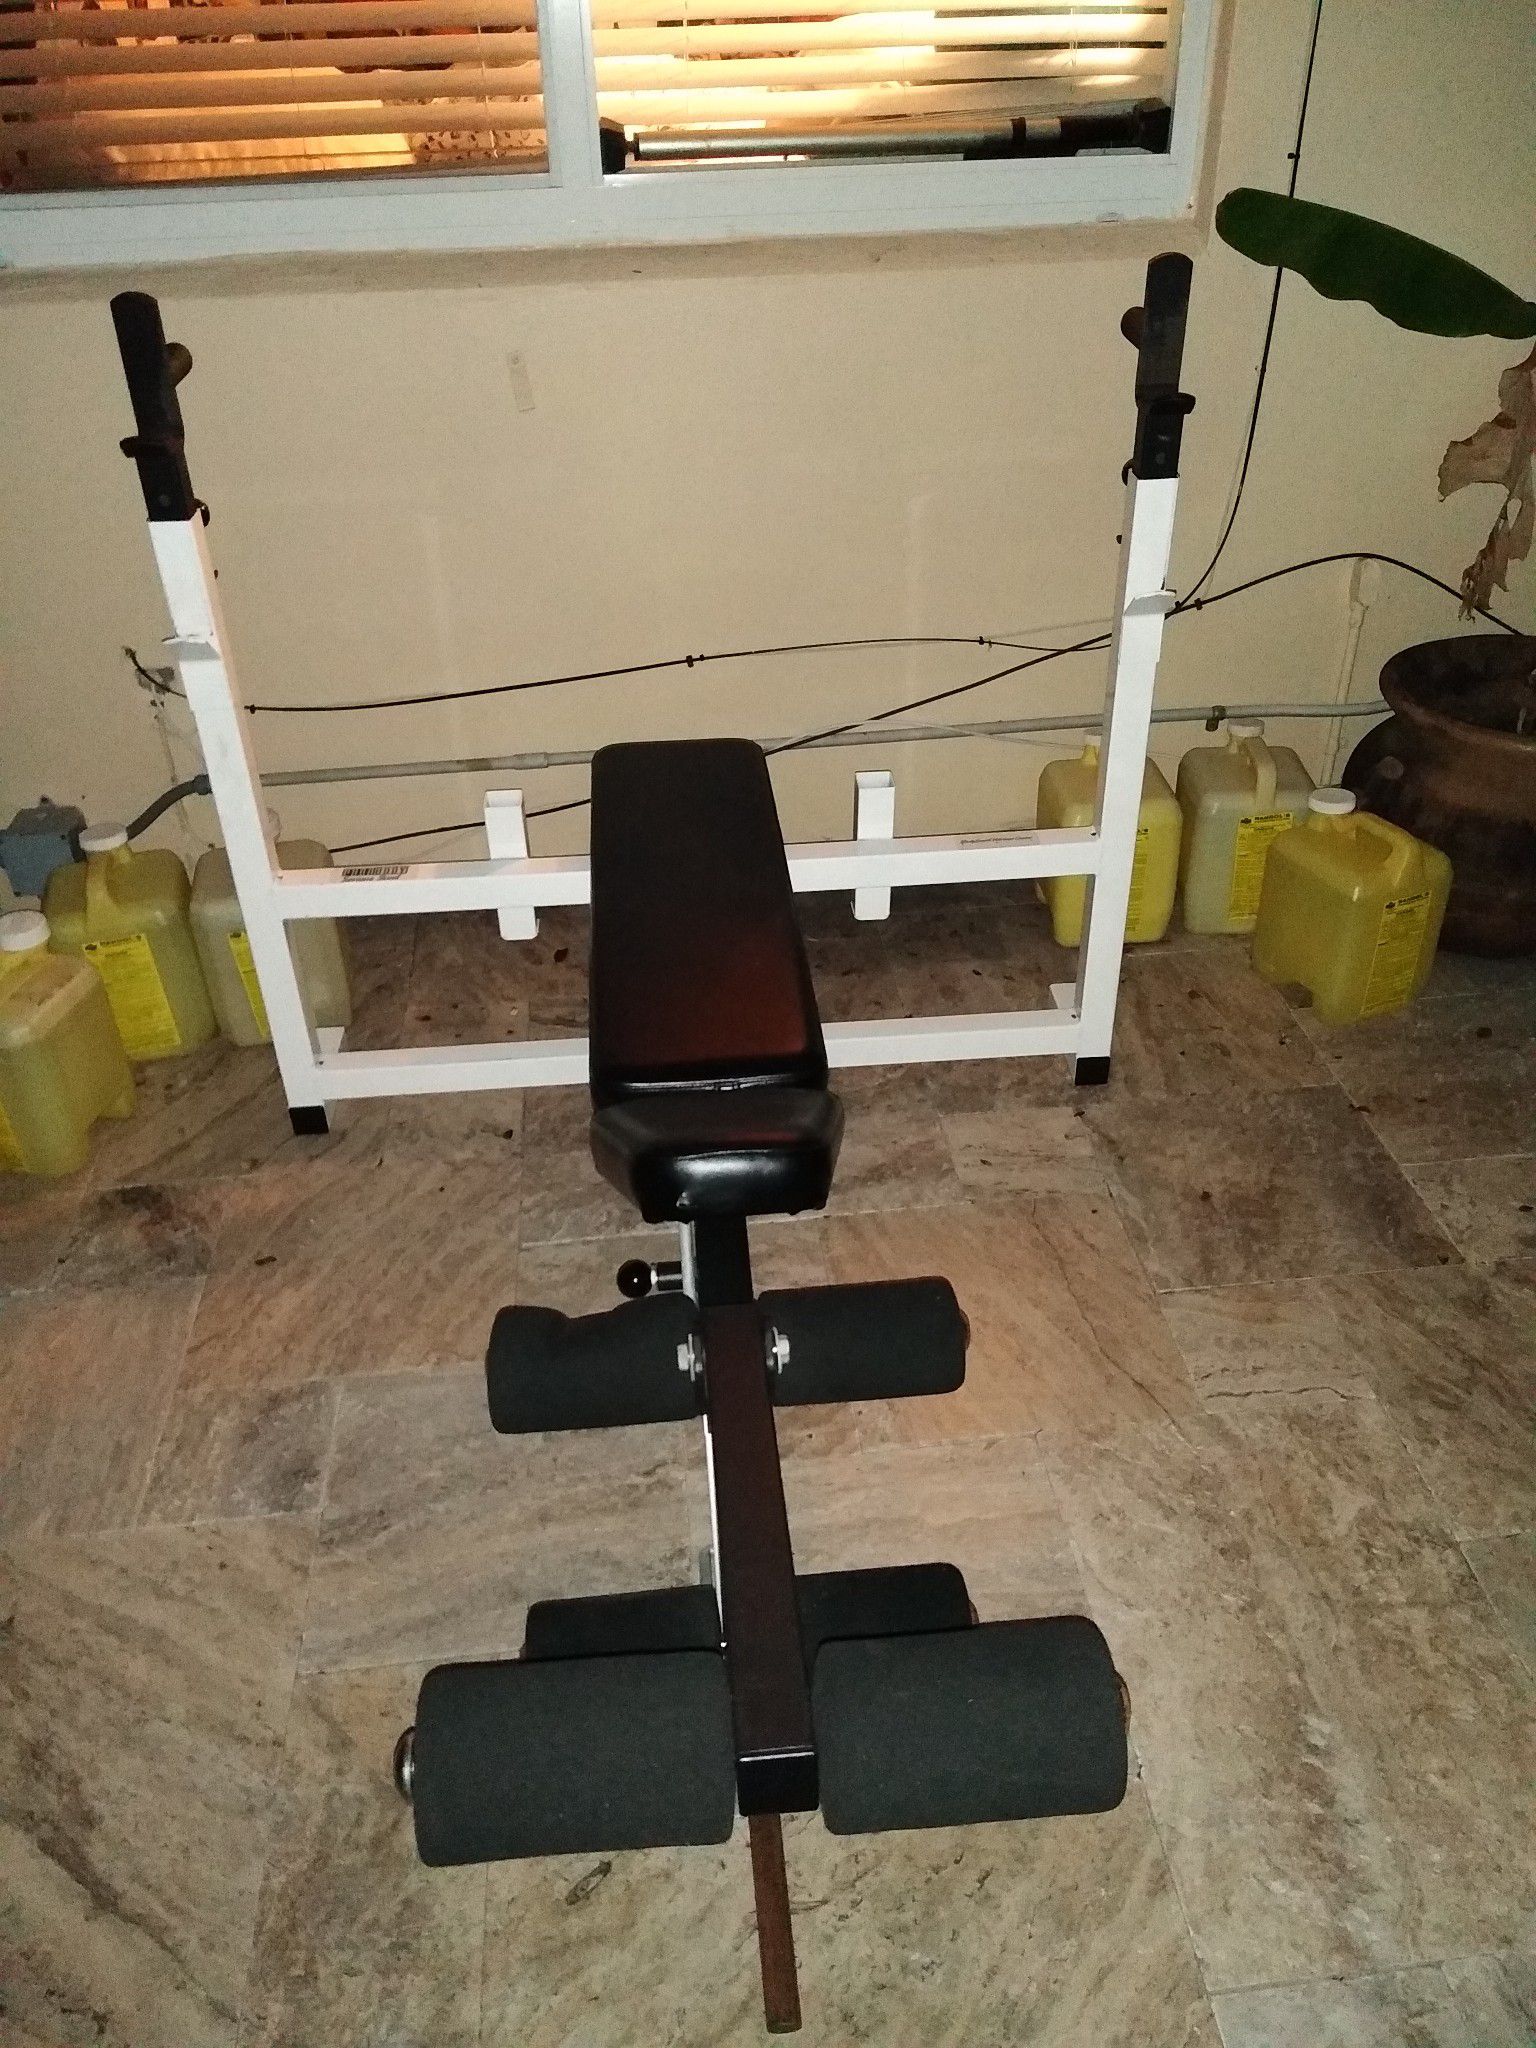 Professional weight bench with attachment for legs and hamstrings. Bench is high quality built and in brand new condition